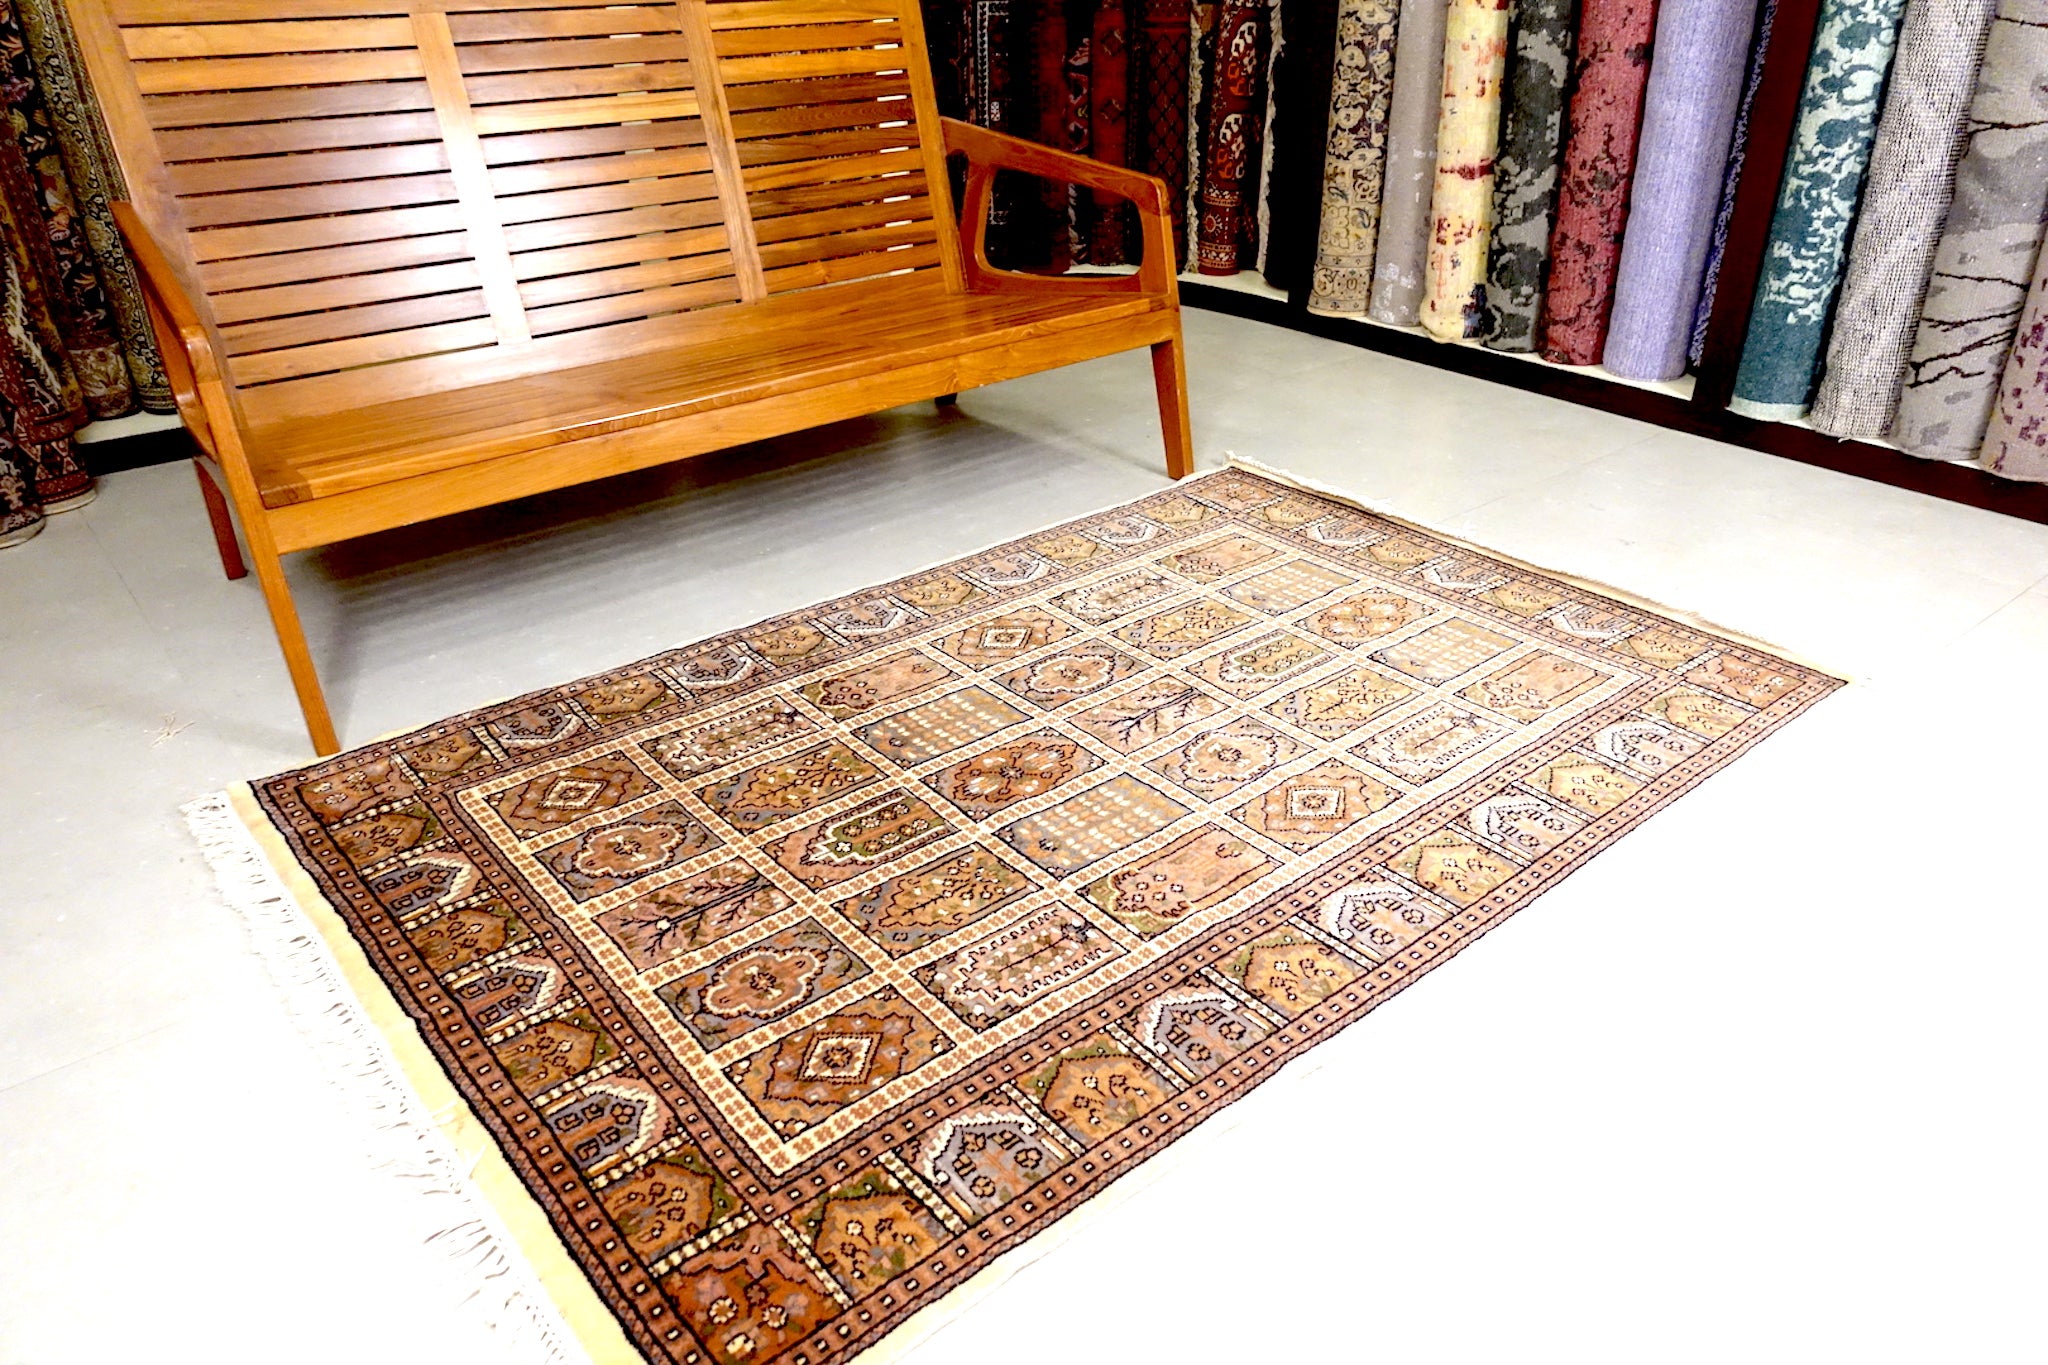 It is a 4 feet by 6 feet Indian wool rug. The colours used on the rug are beige,green and brown.